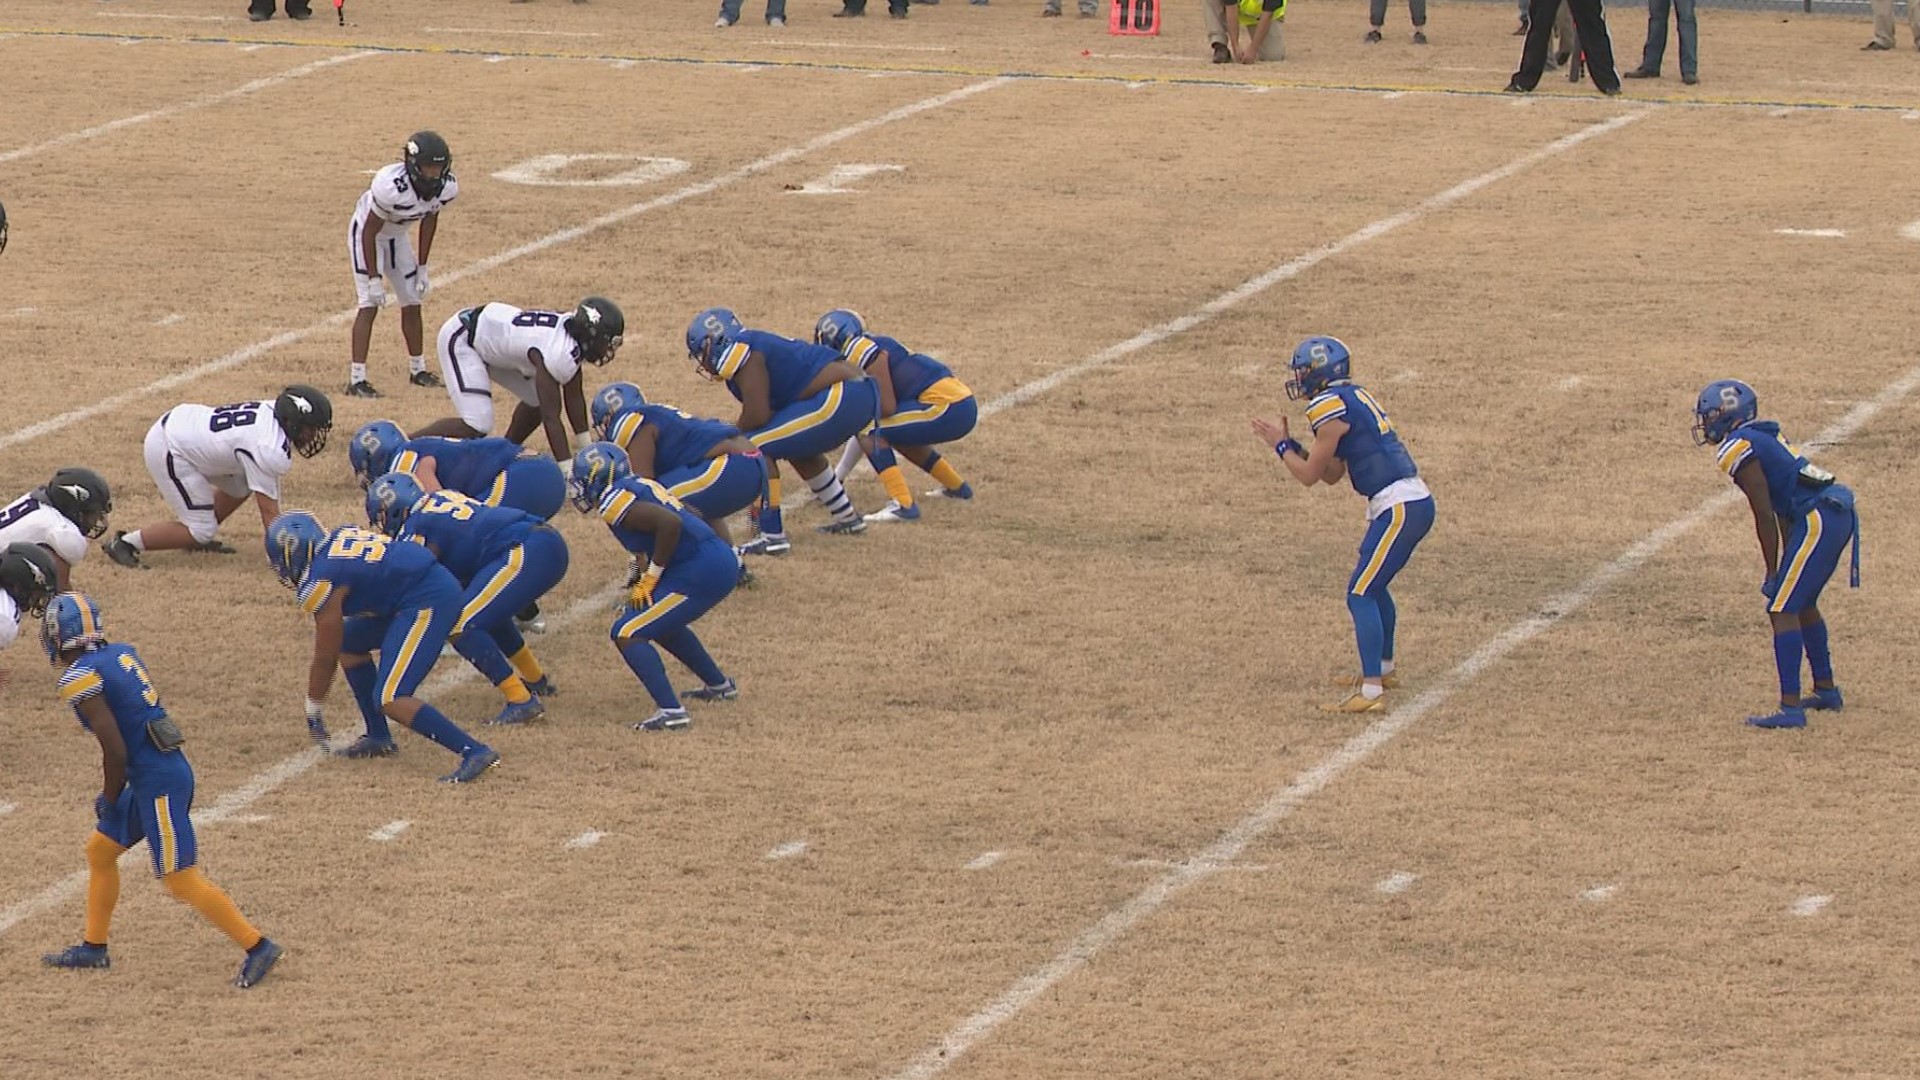 Oscar Smith bolted out to an early 14-3 and didn't let up on the gas pedal as they throttled Battlefield 49-10 in the Class 6 state semifinals on Saturday.